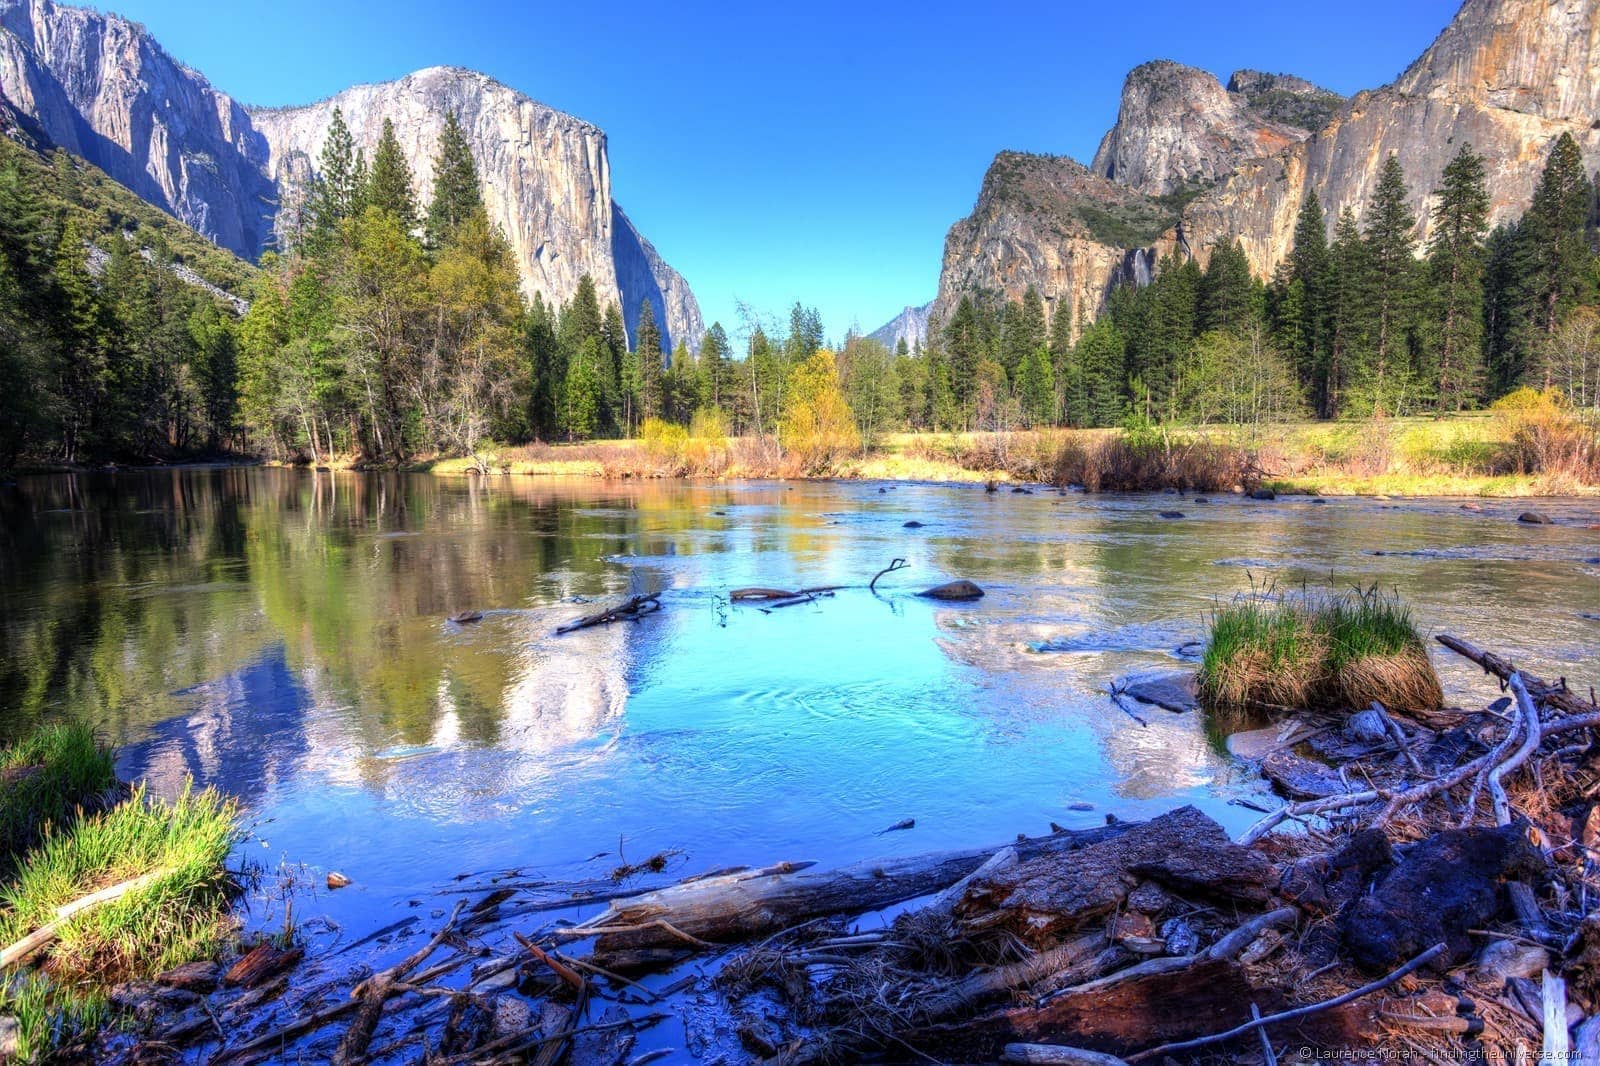 The Best Photography Spots In Yosemite